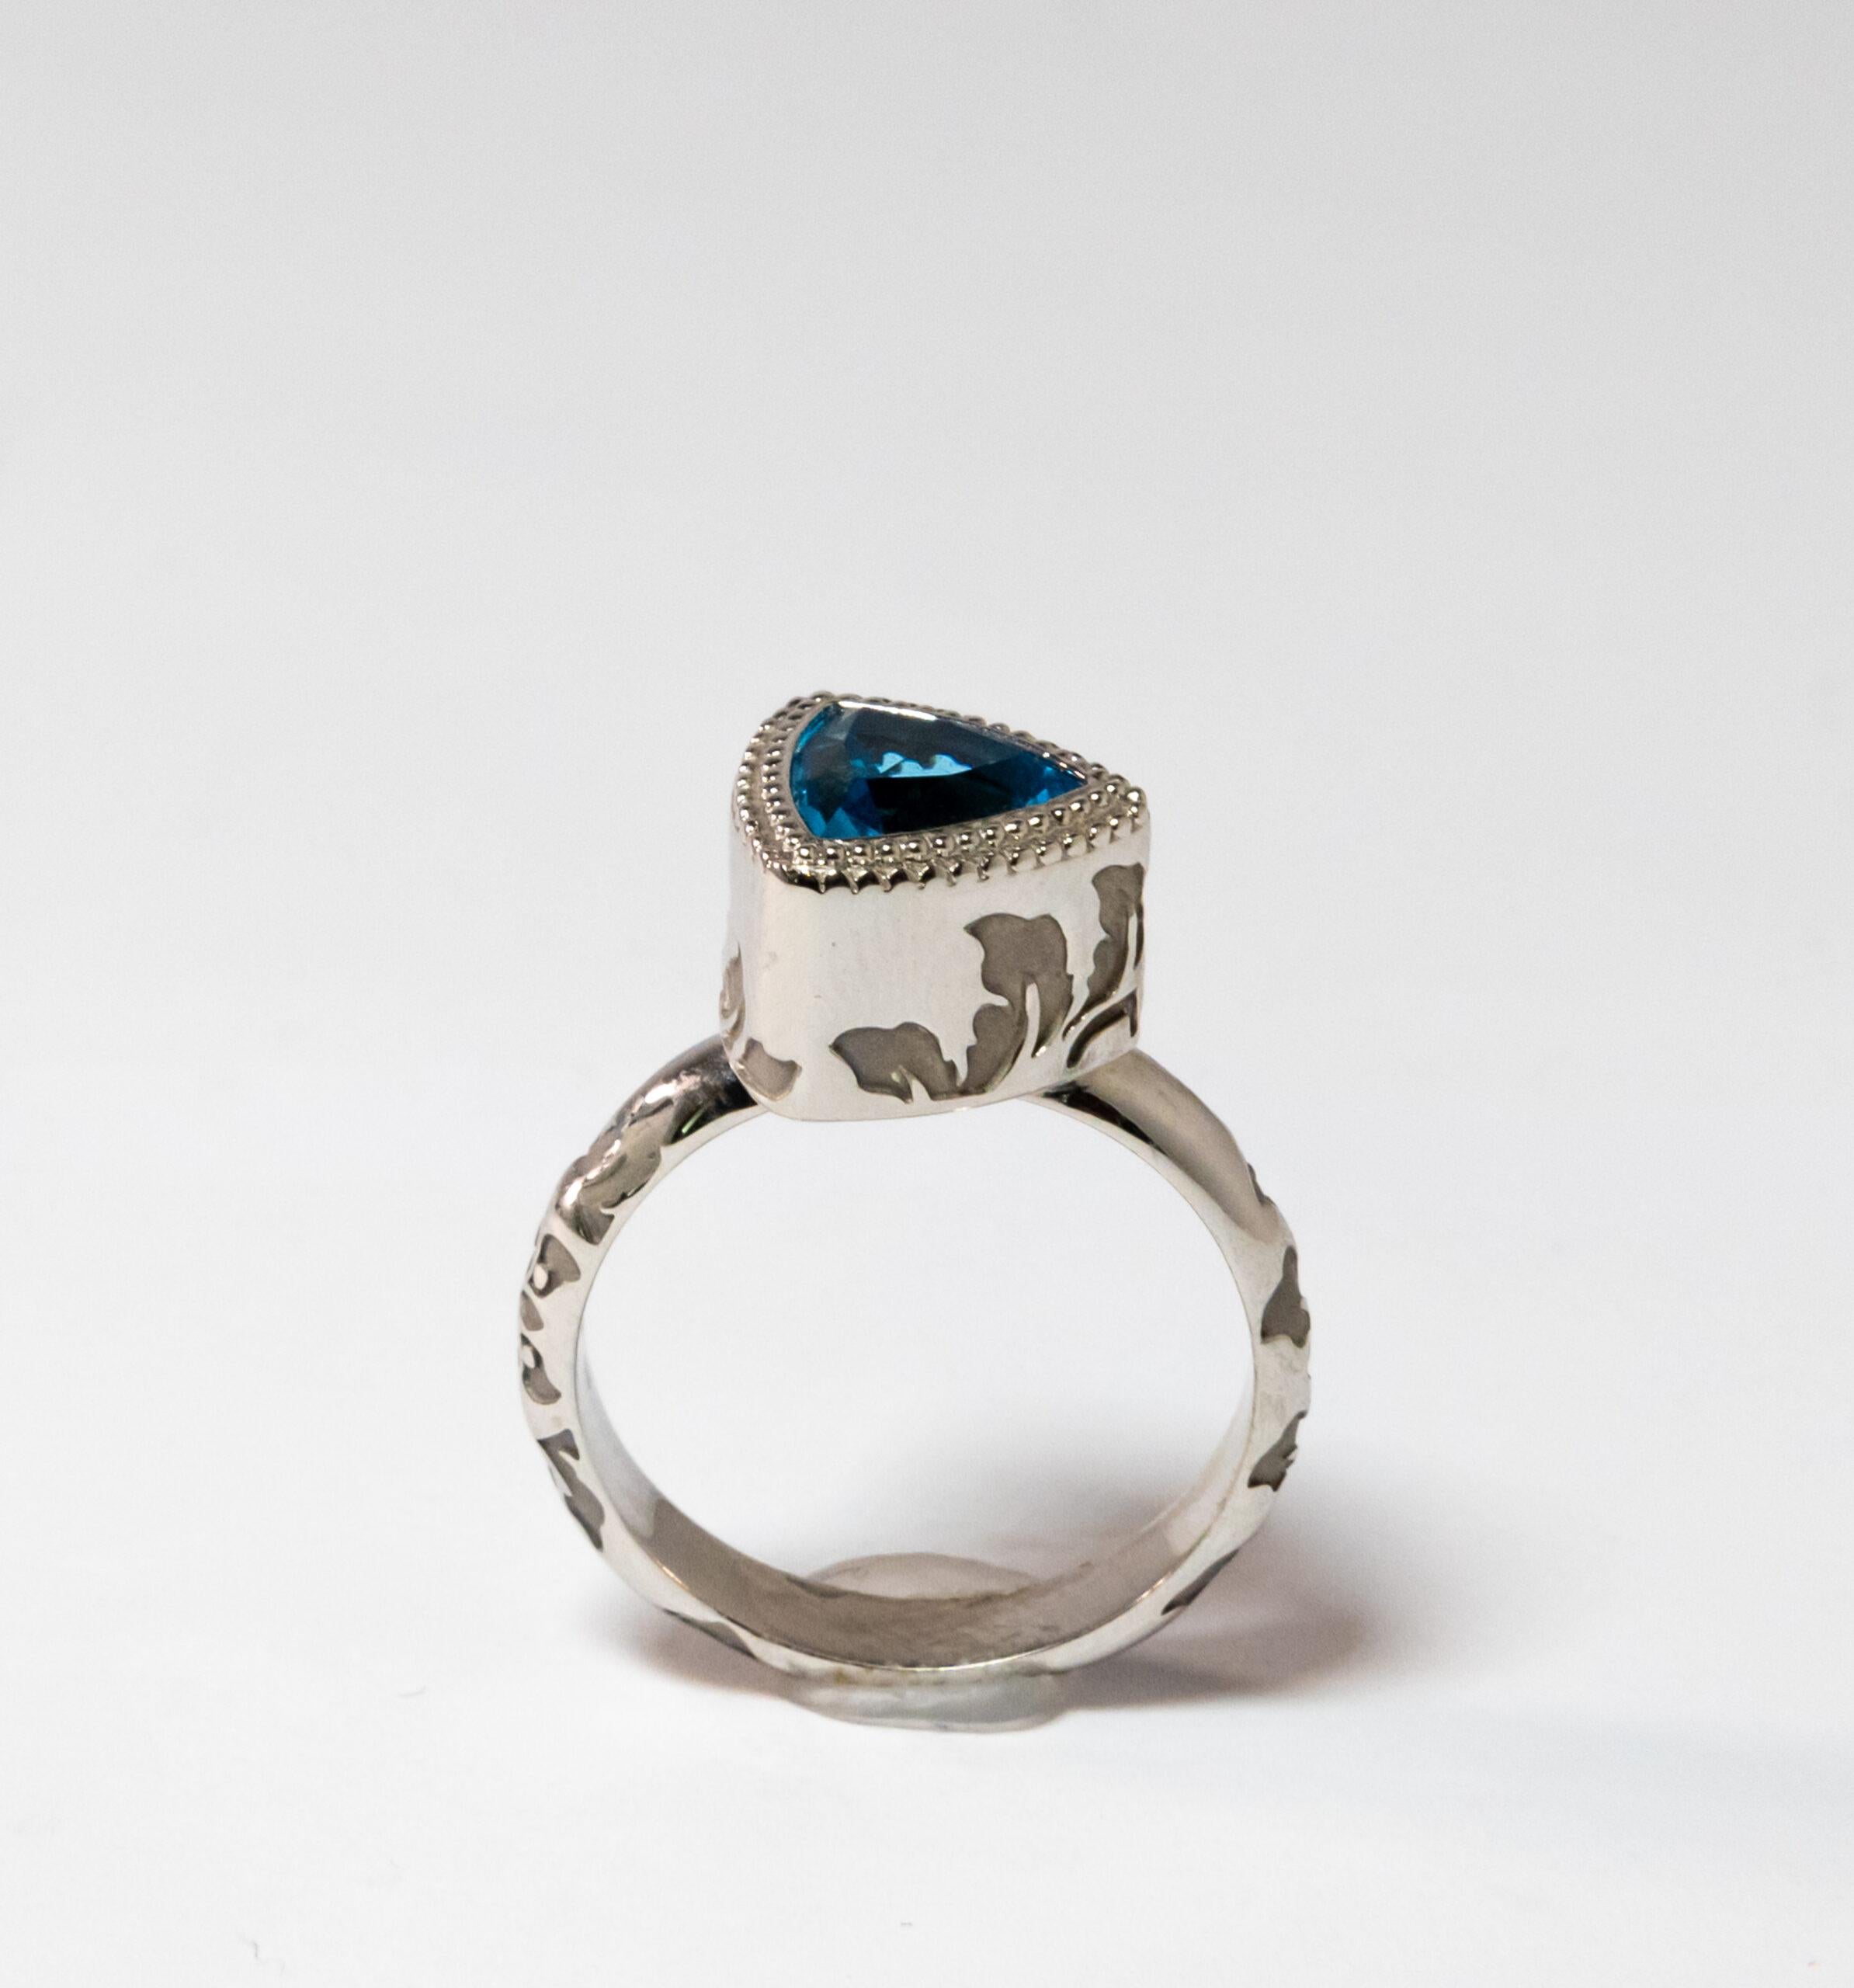 This ring is made of 18K White Gold. It is decorated with floral engravings and triangle-cut Blue Topaz (~ 2.02ct).

Size – 55 (7 US)